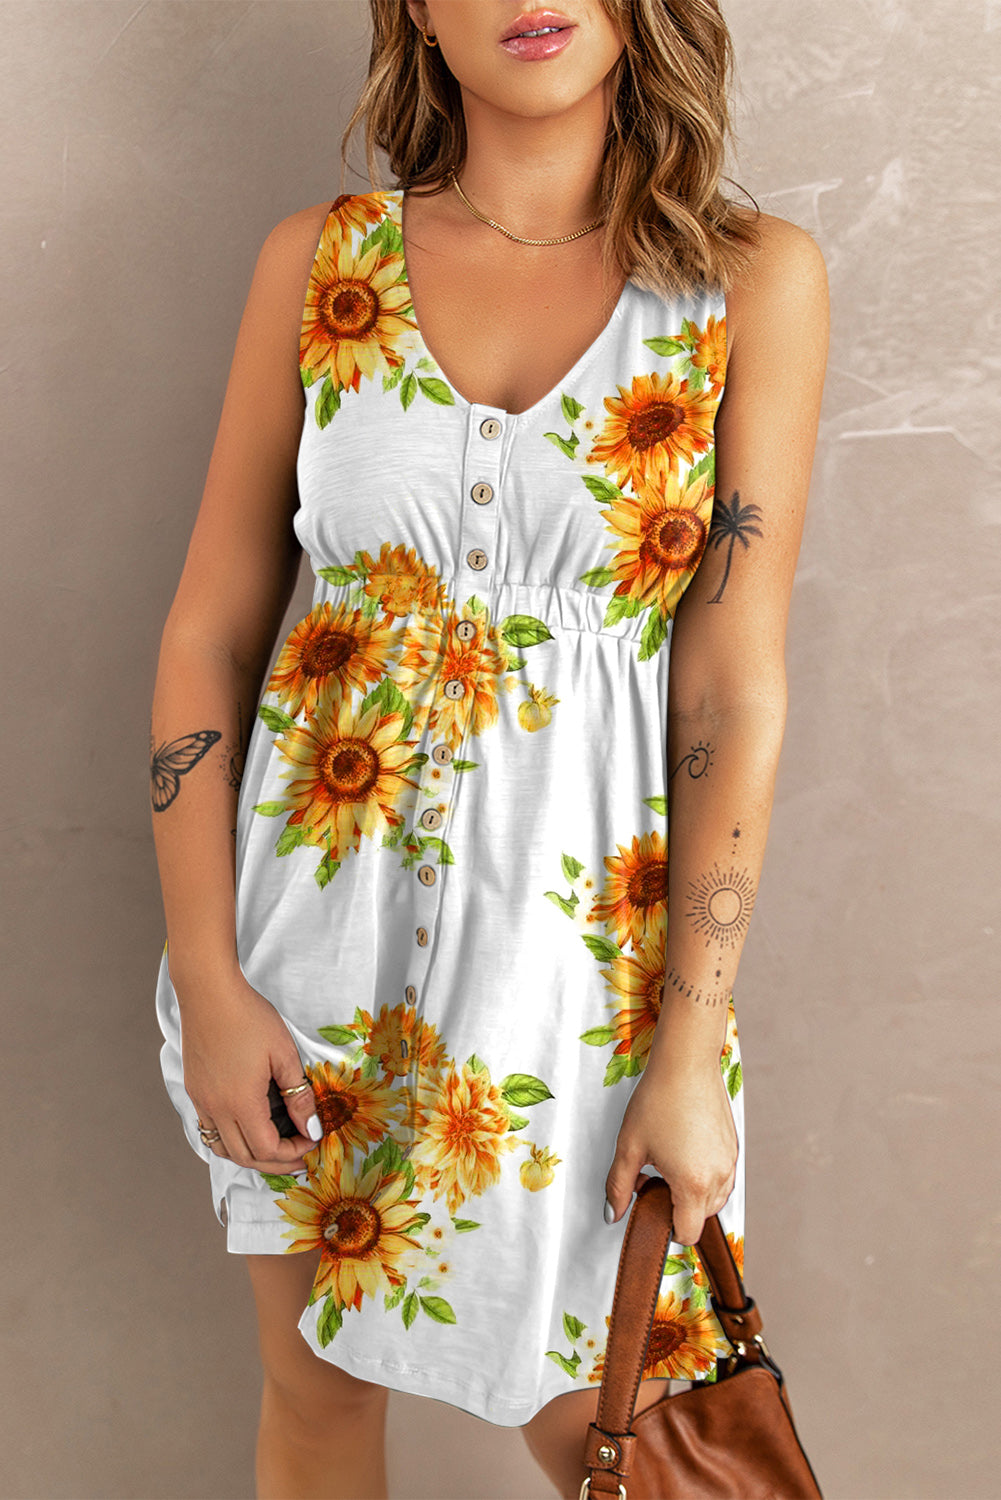 Sunflower Dress - The Lakeside Boutique